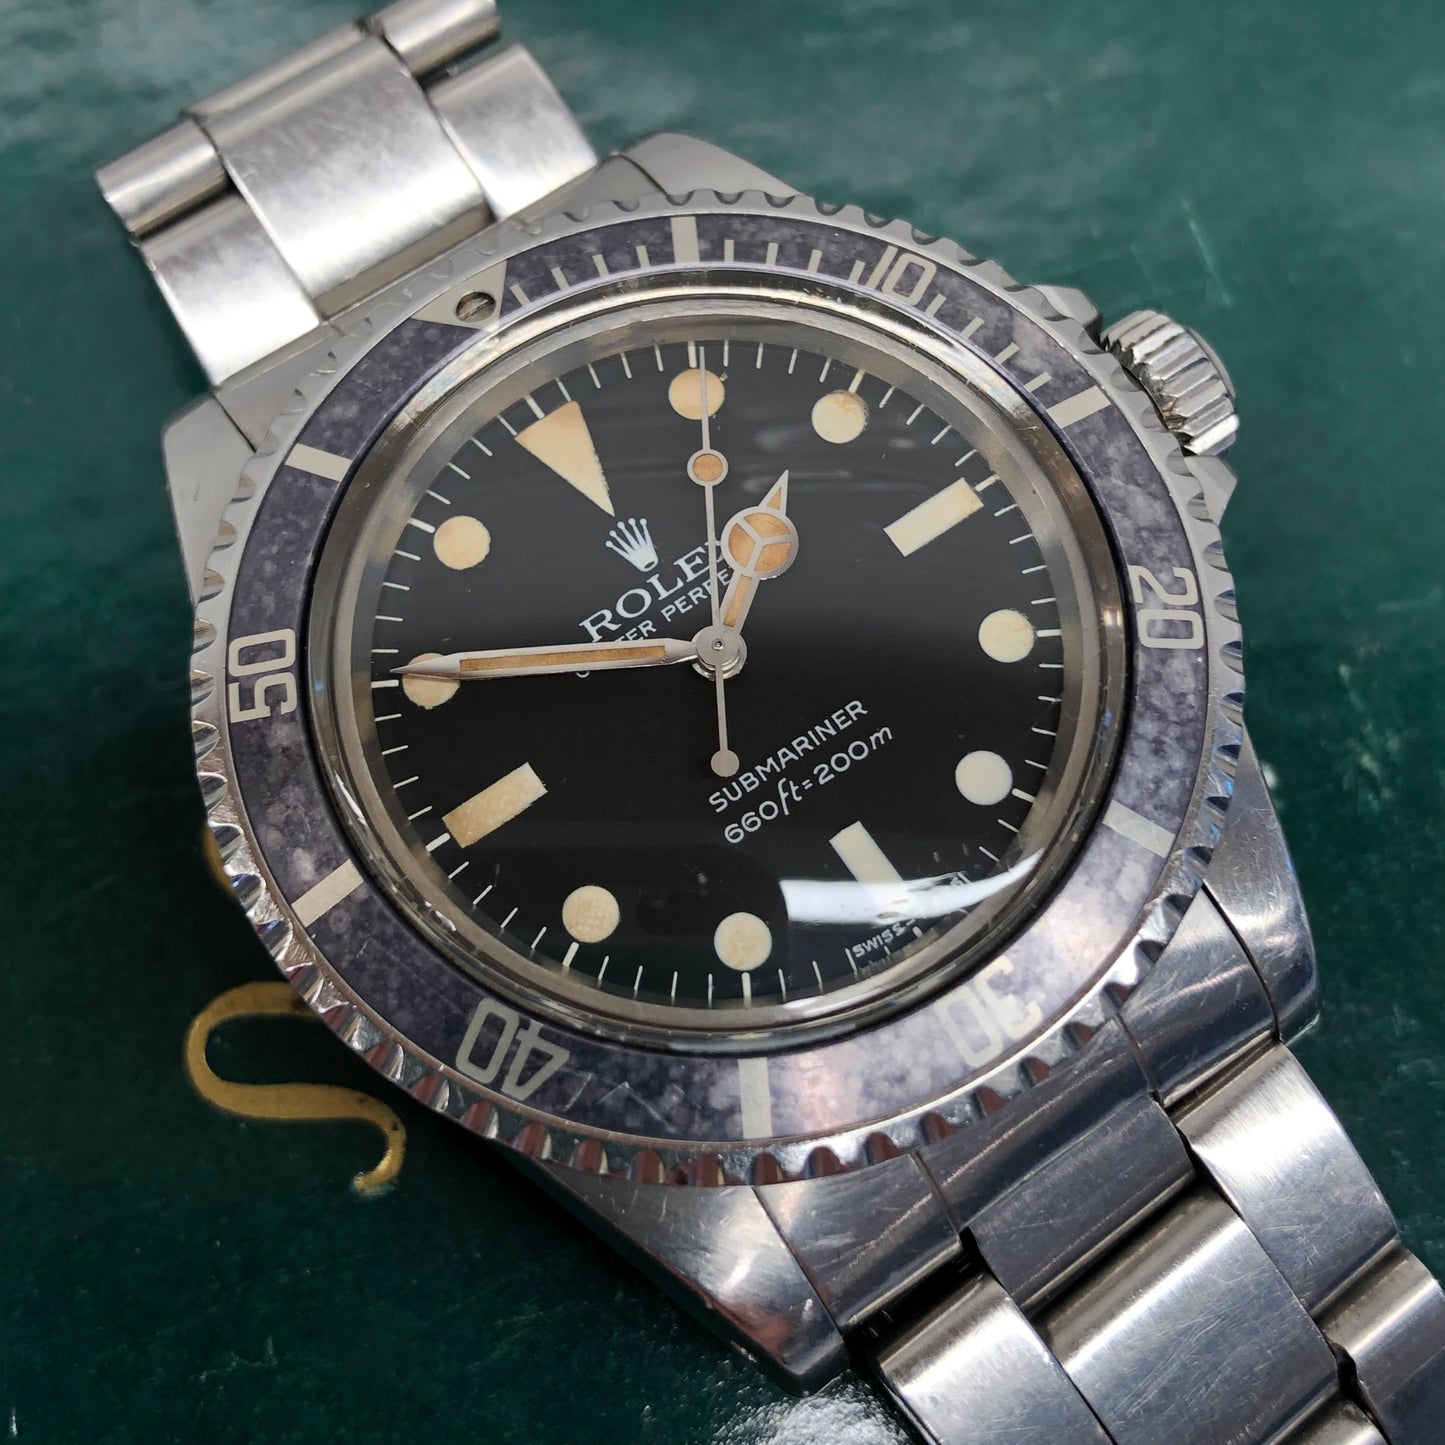 1979 Rolex Submariner 5513 Mk 2 Maxi Dial Stainless Steel Automatic Wristwatch - HASHTAGWATCHCO